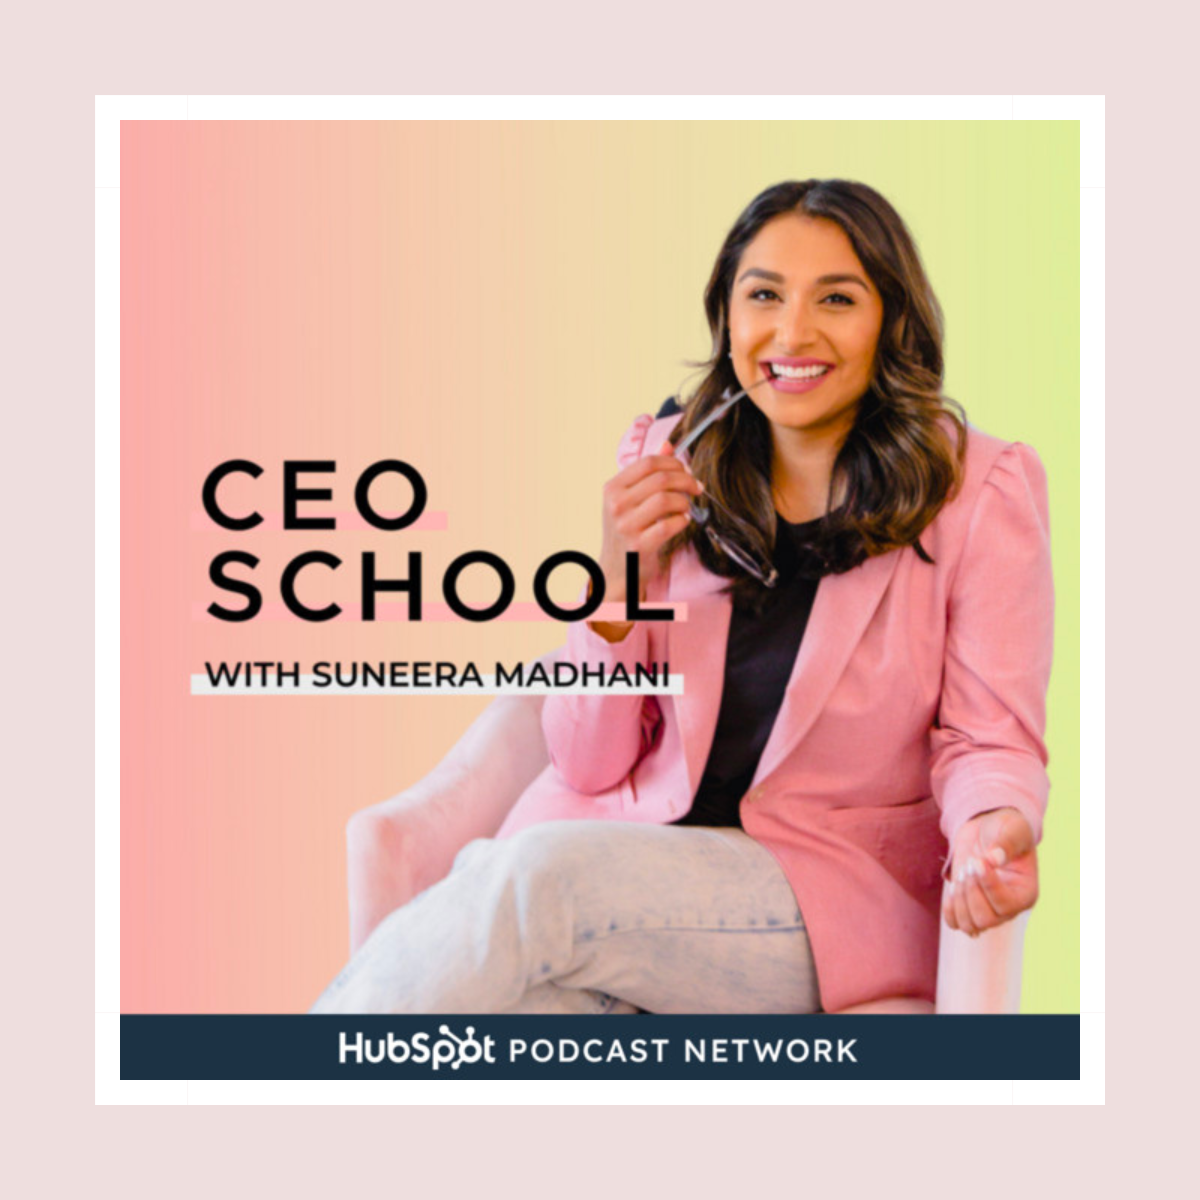 The CEO School podcast brand image.